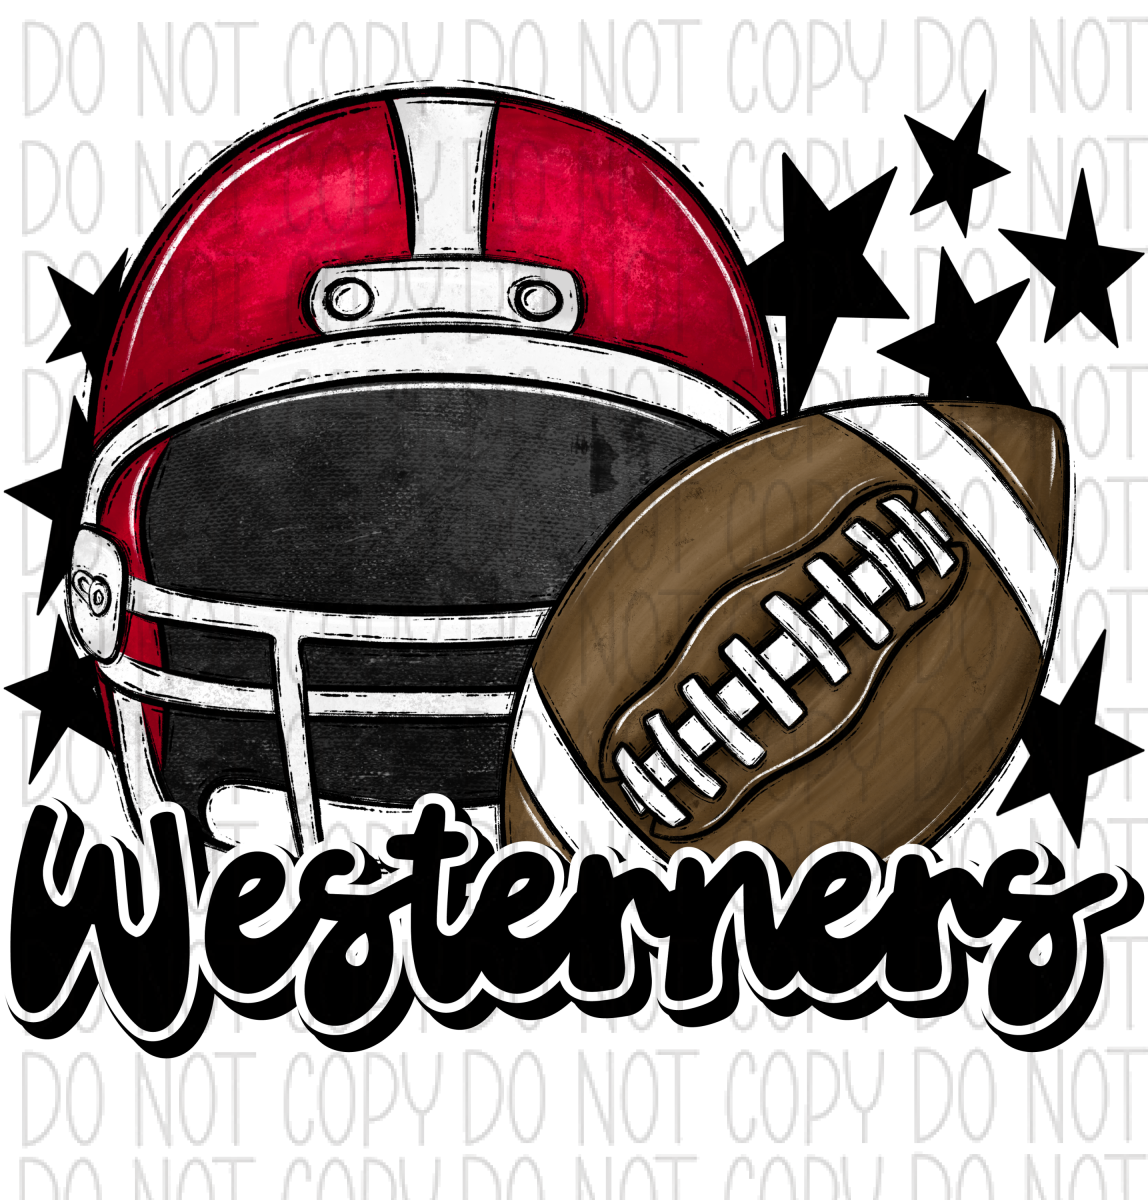 Football Helmet Westerners Dtf Transfer (See Color Options) Pocket Size 3 / Red Lettering Transfers